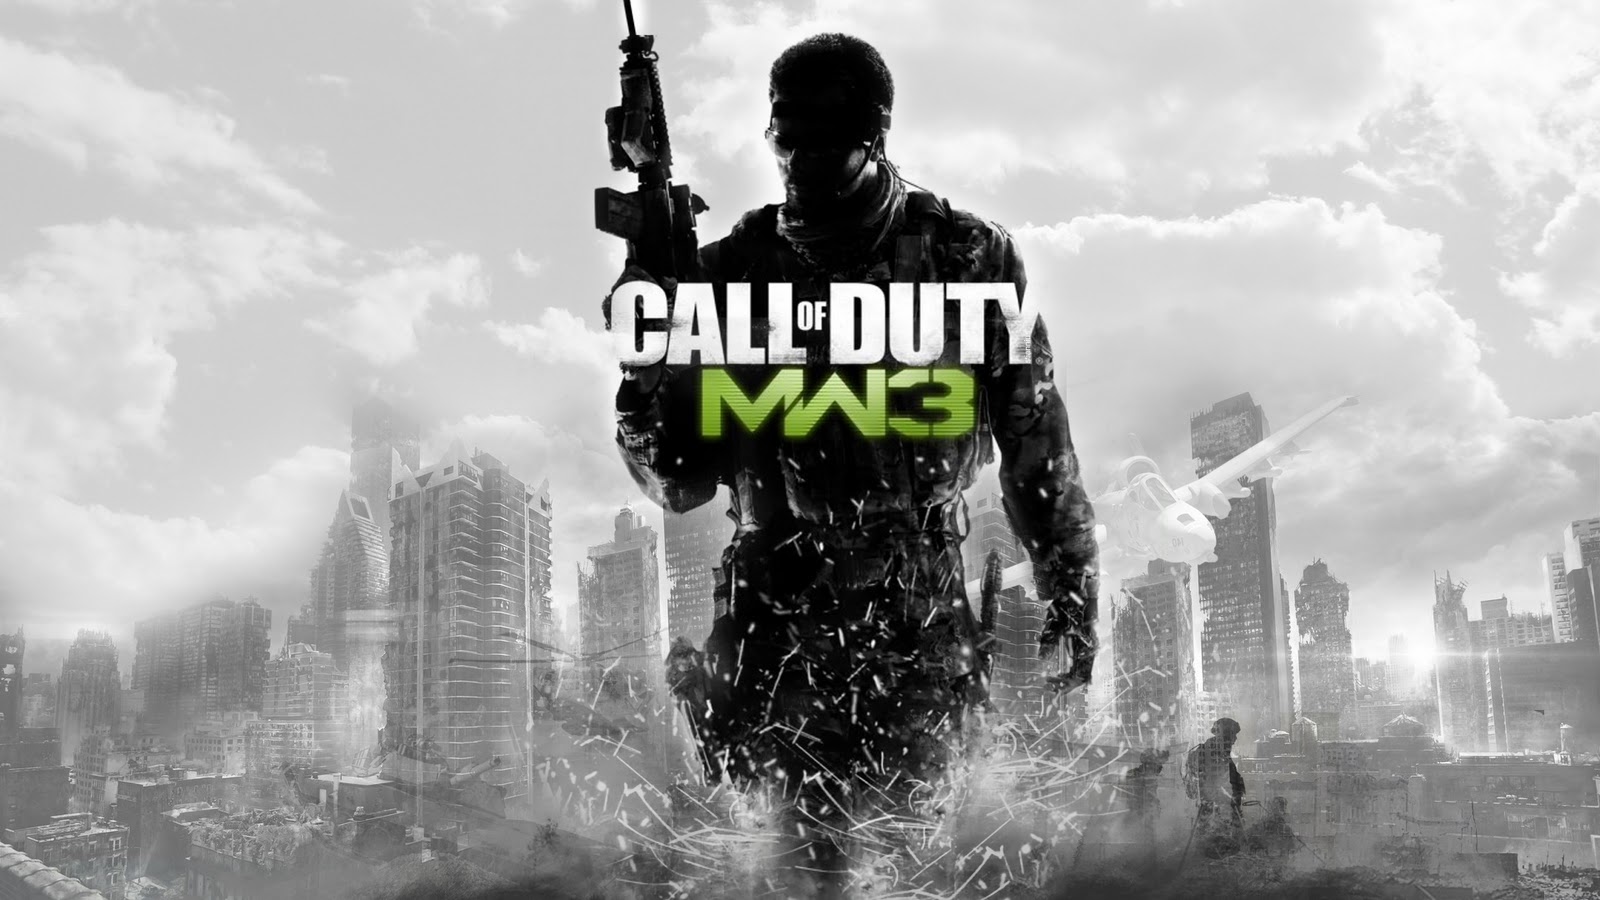 Duty Mw3 Wallpaper Illustration Call Of Text